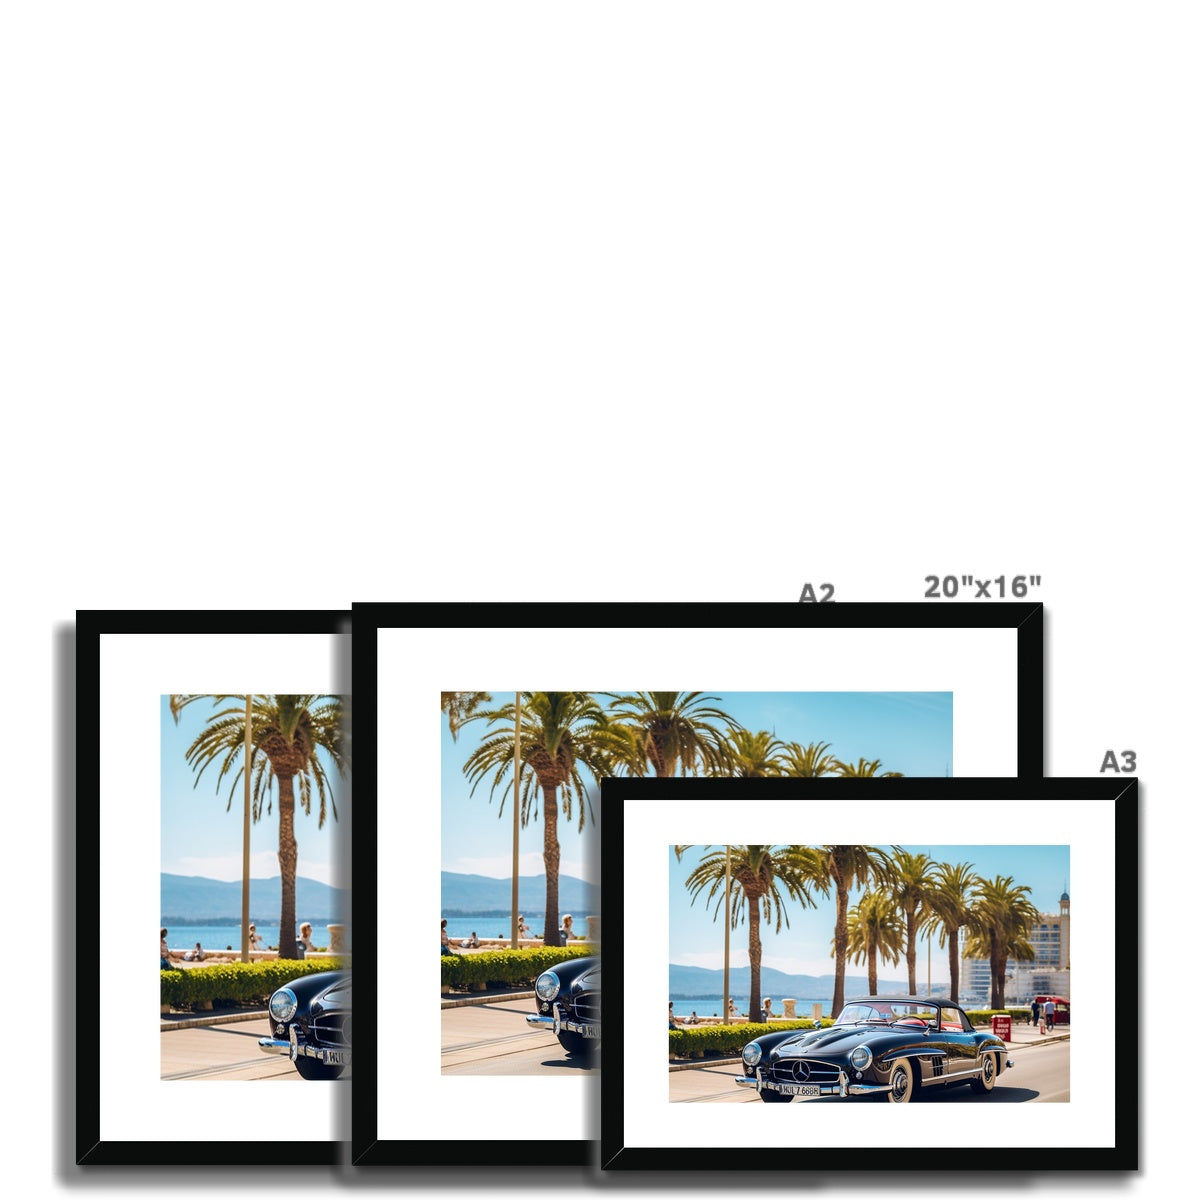 Retro Mercedes, Cruising in Cannes, South of France Summers Framed & Mounted Print